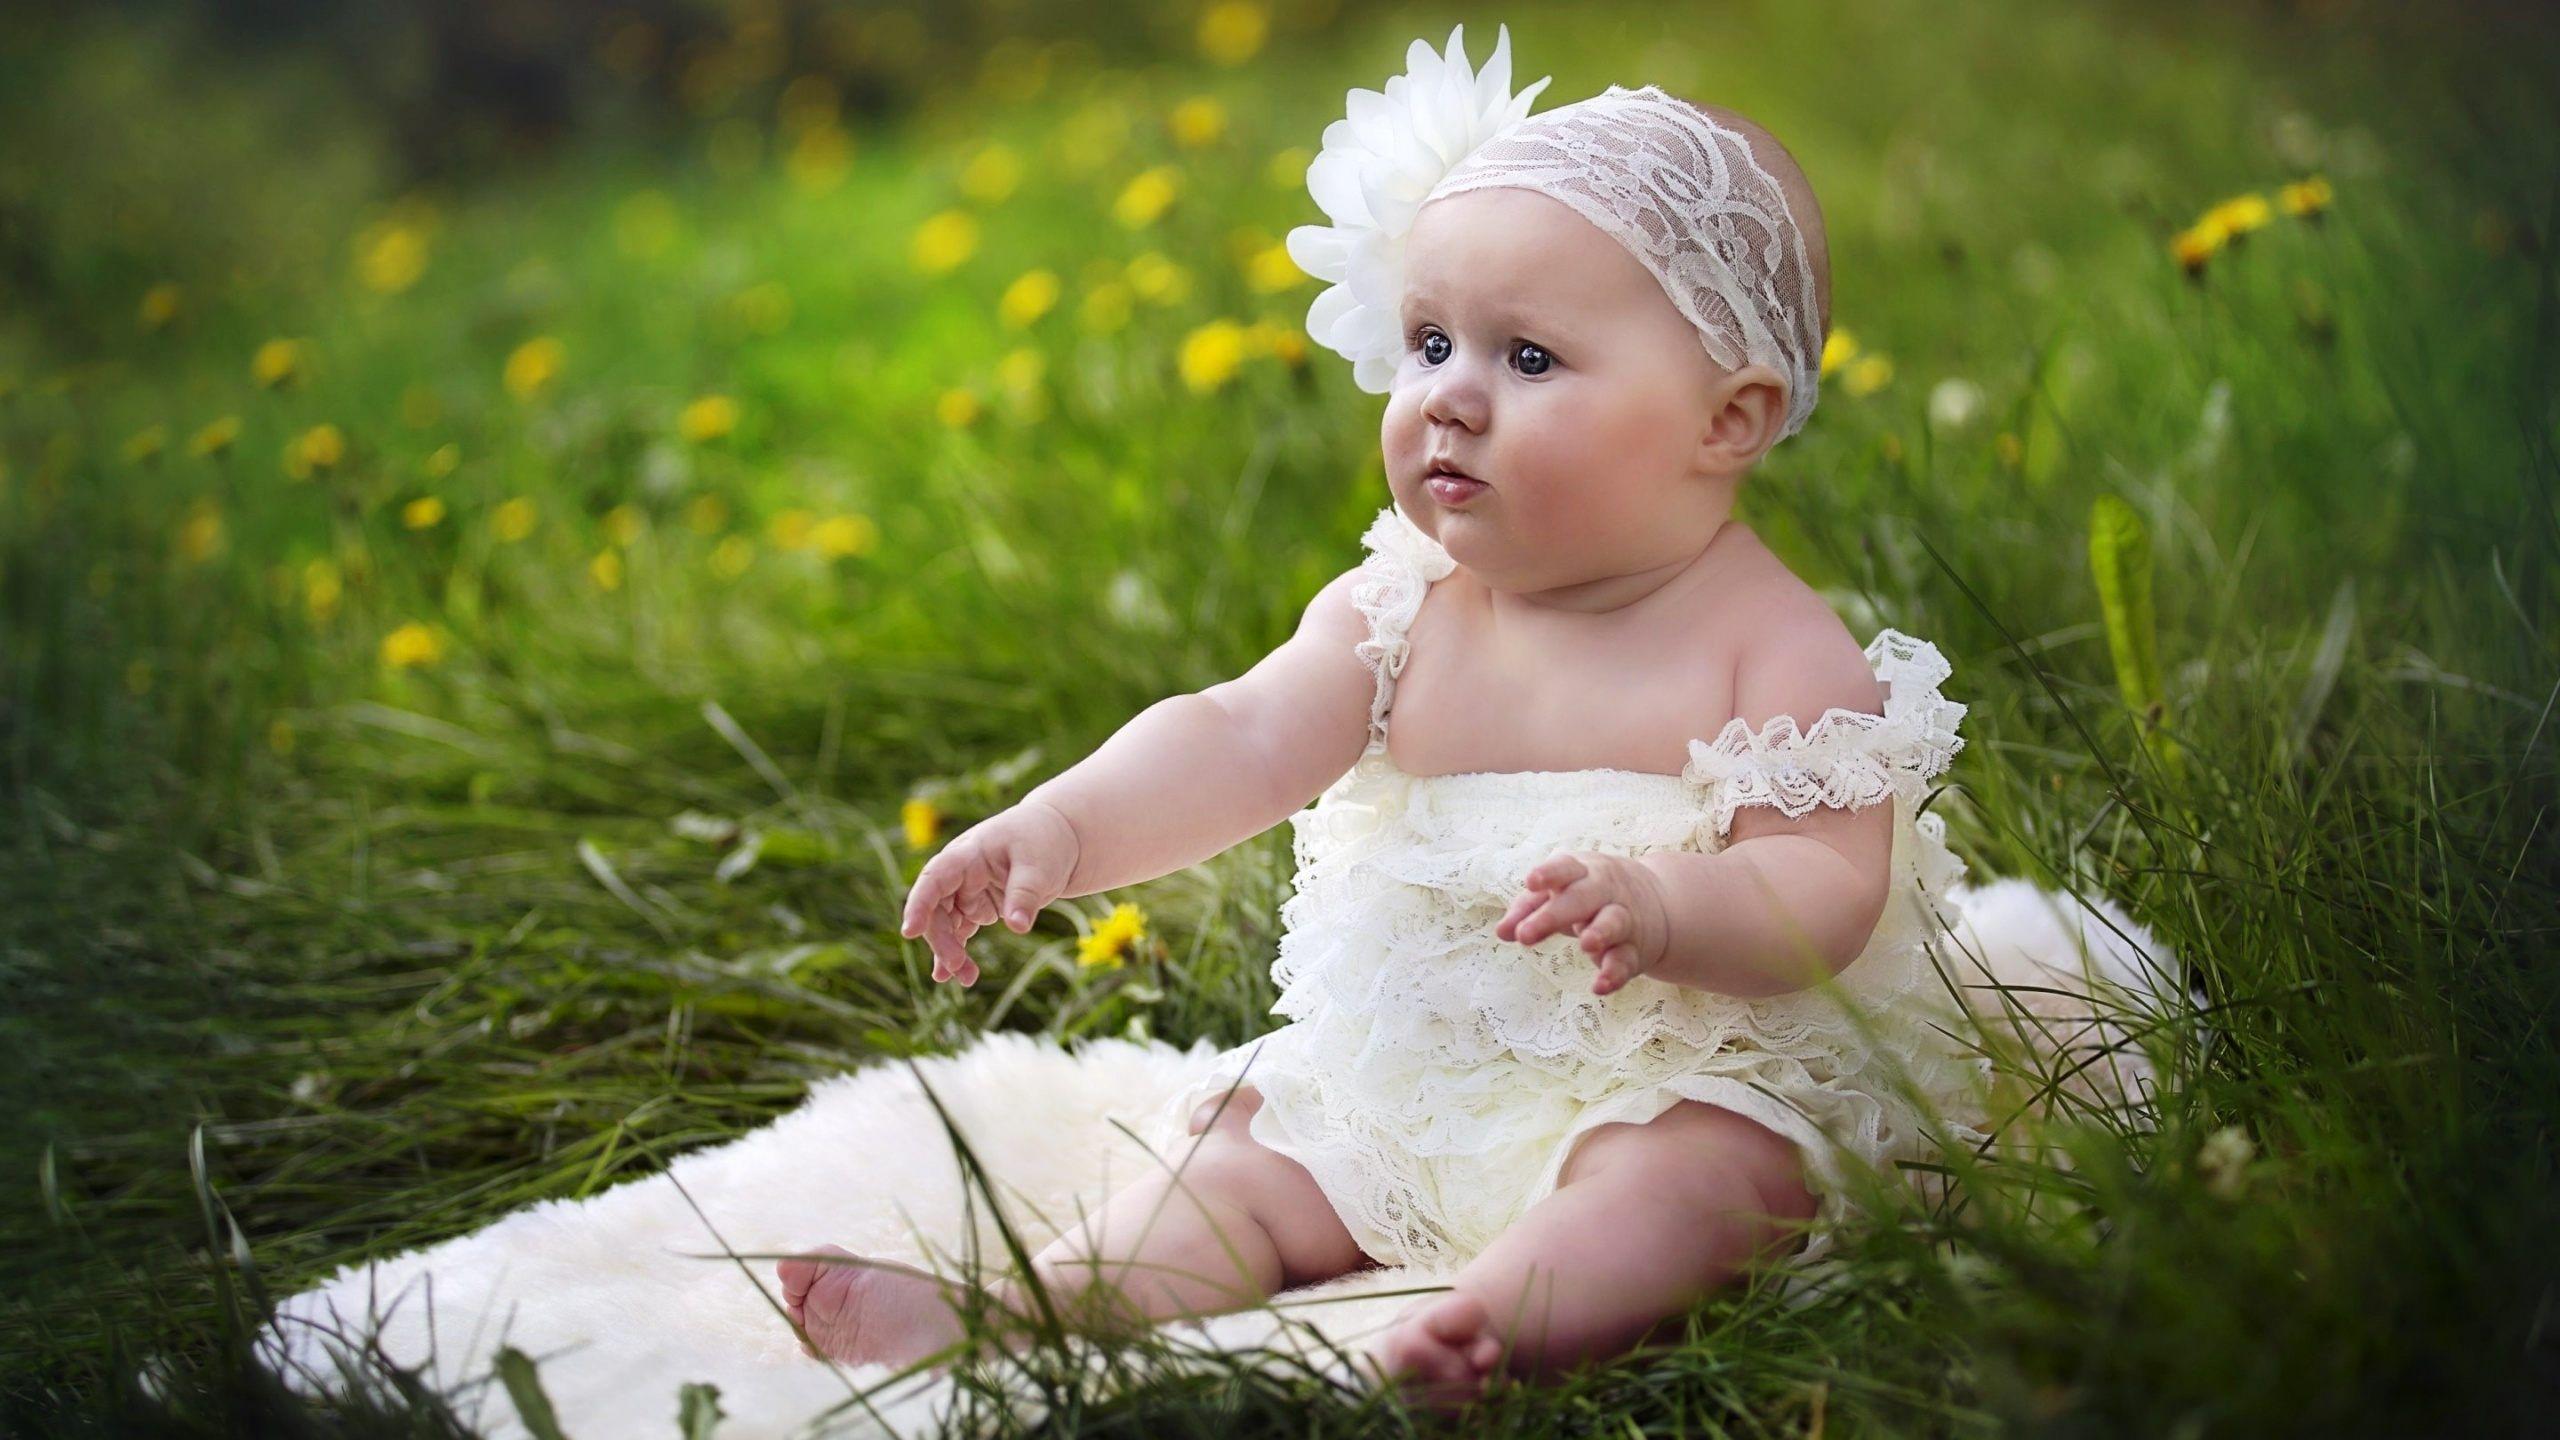 Baby Wallpaper Picture Of Cute Babies Best Collection